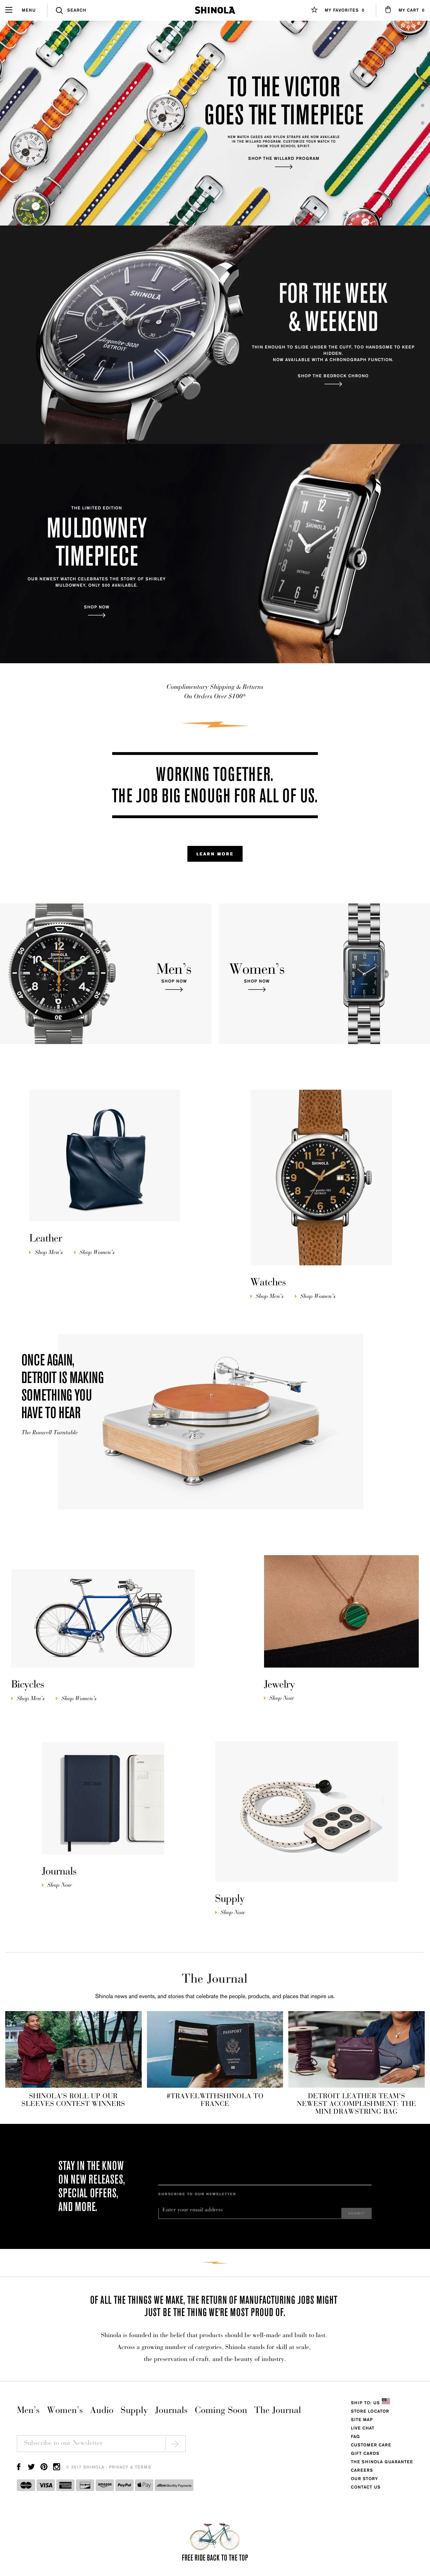  Shinola Detroit Landing Page Example: Shop Shinola's Watches, Leather Goods, Bicycles, and Journals.